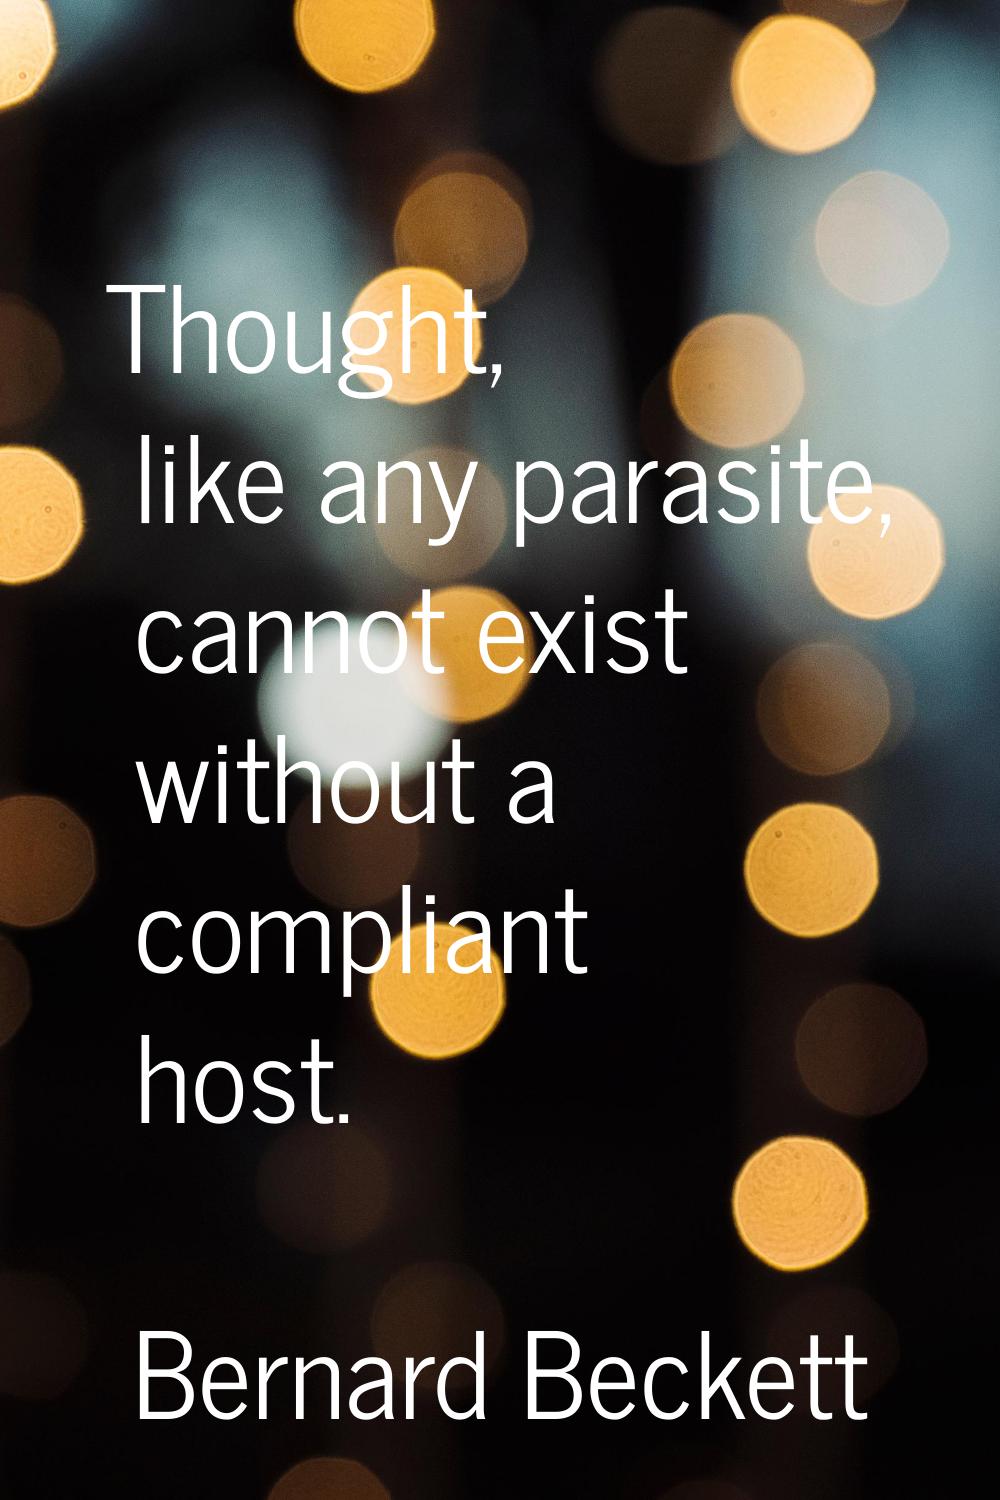 Thought, like any parasite, cannot exist without a compliant host.